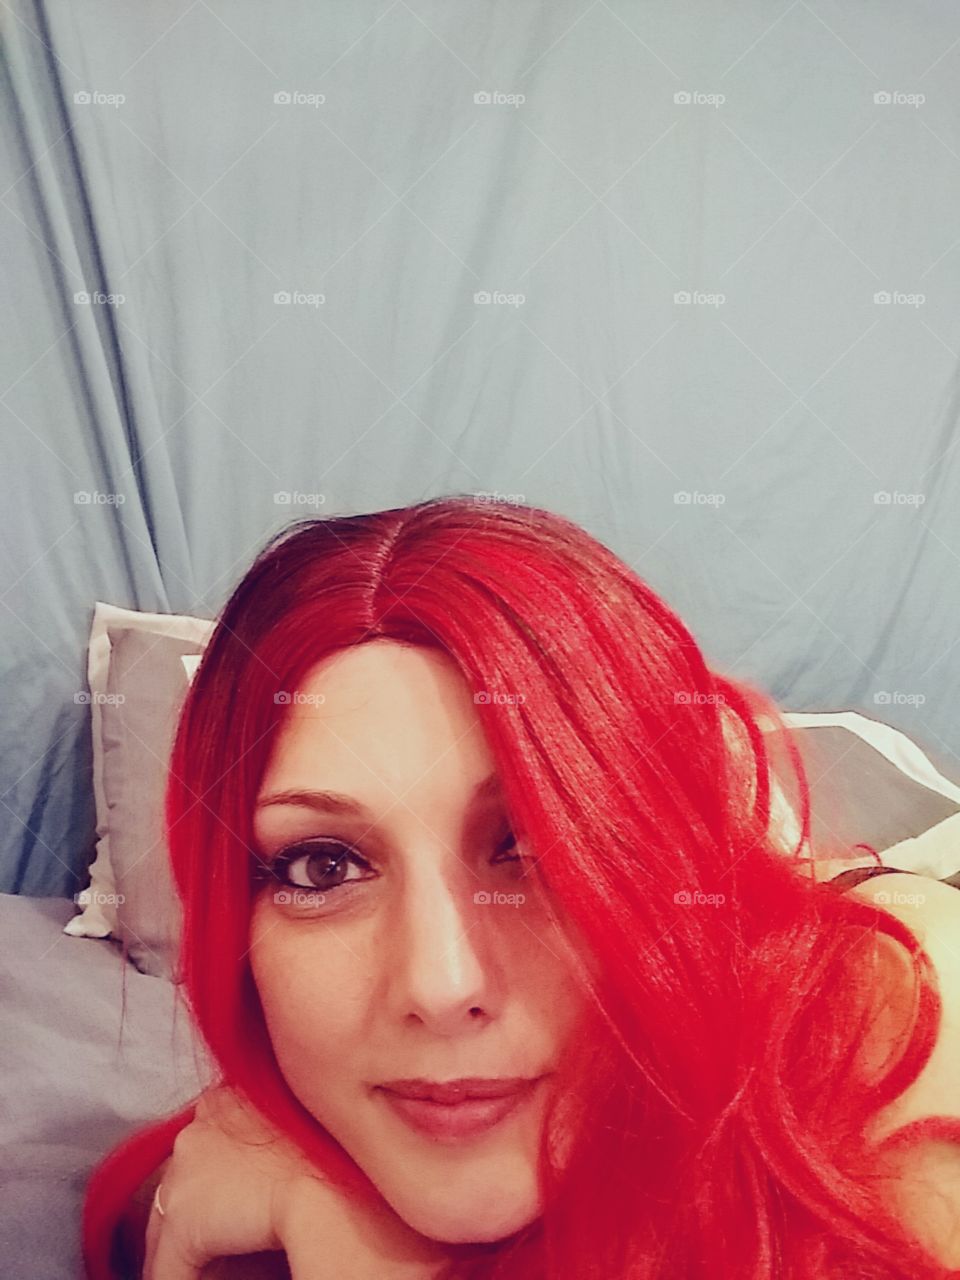 Another wig to play with!